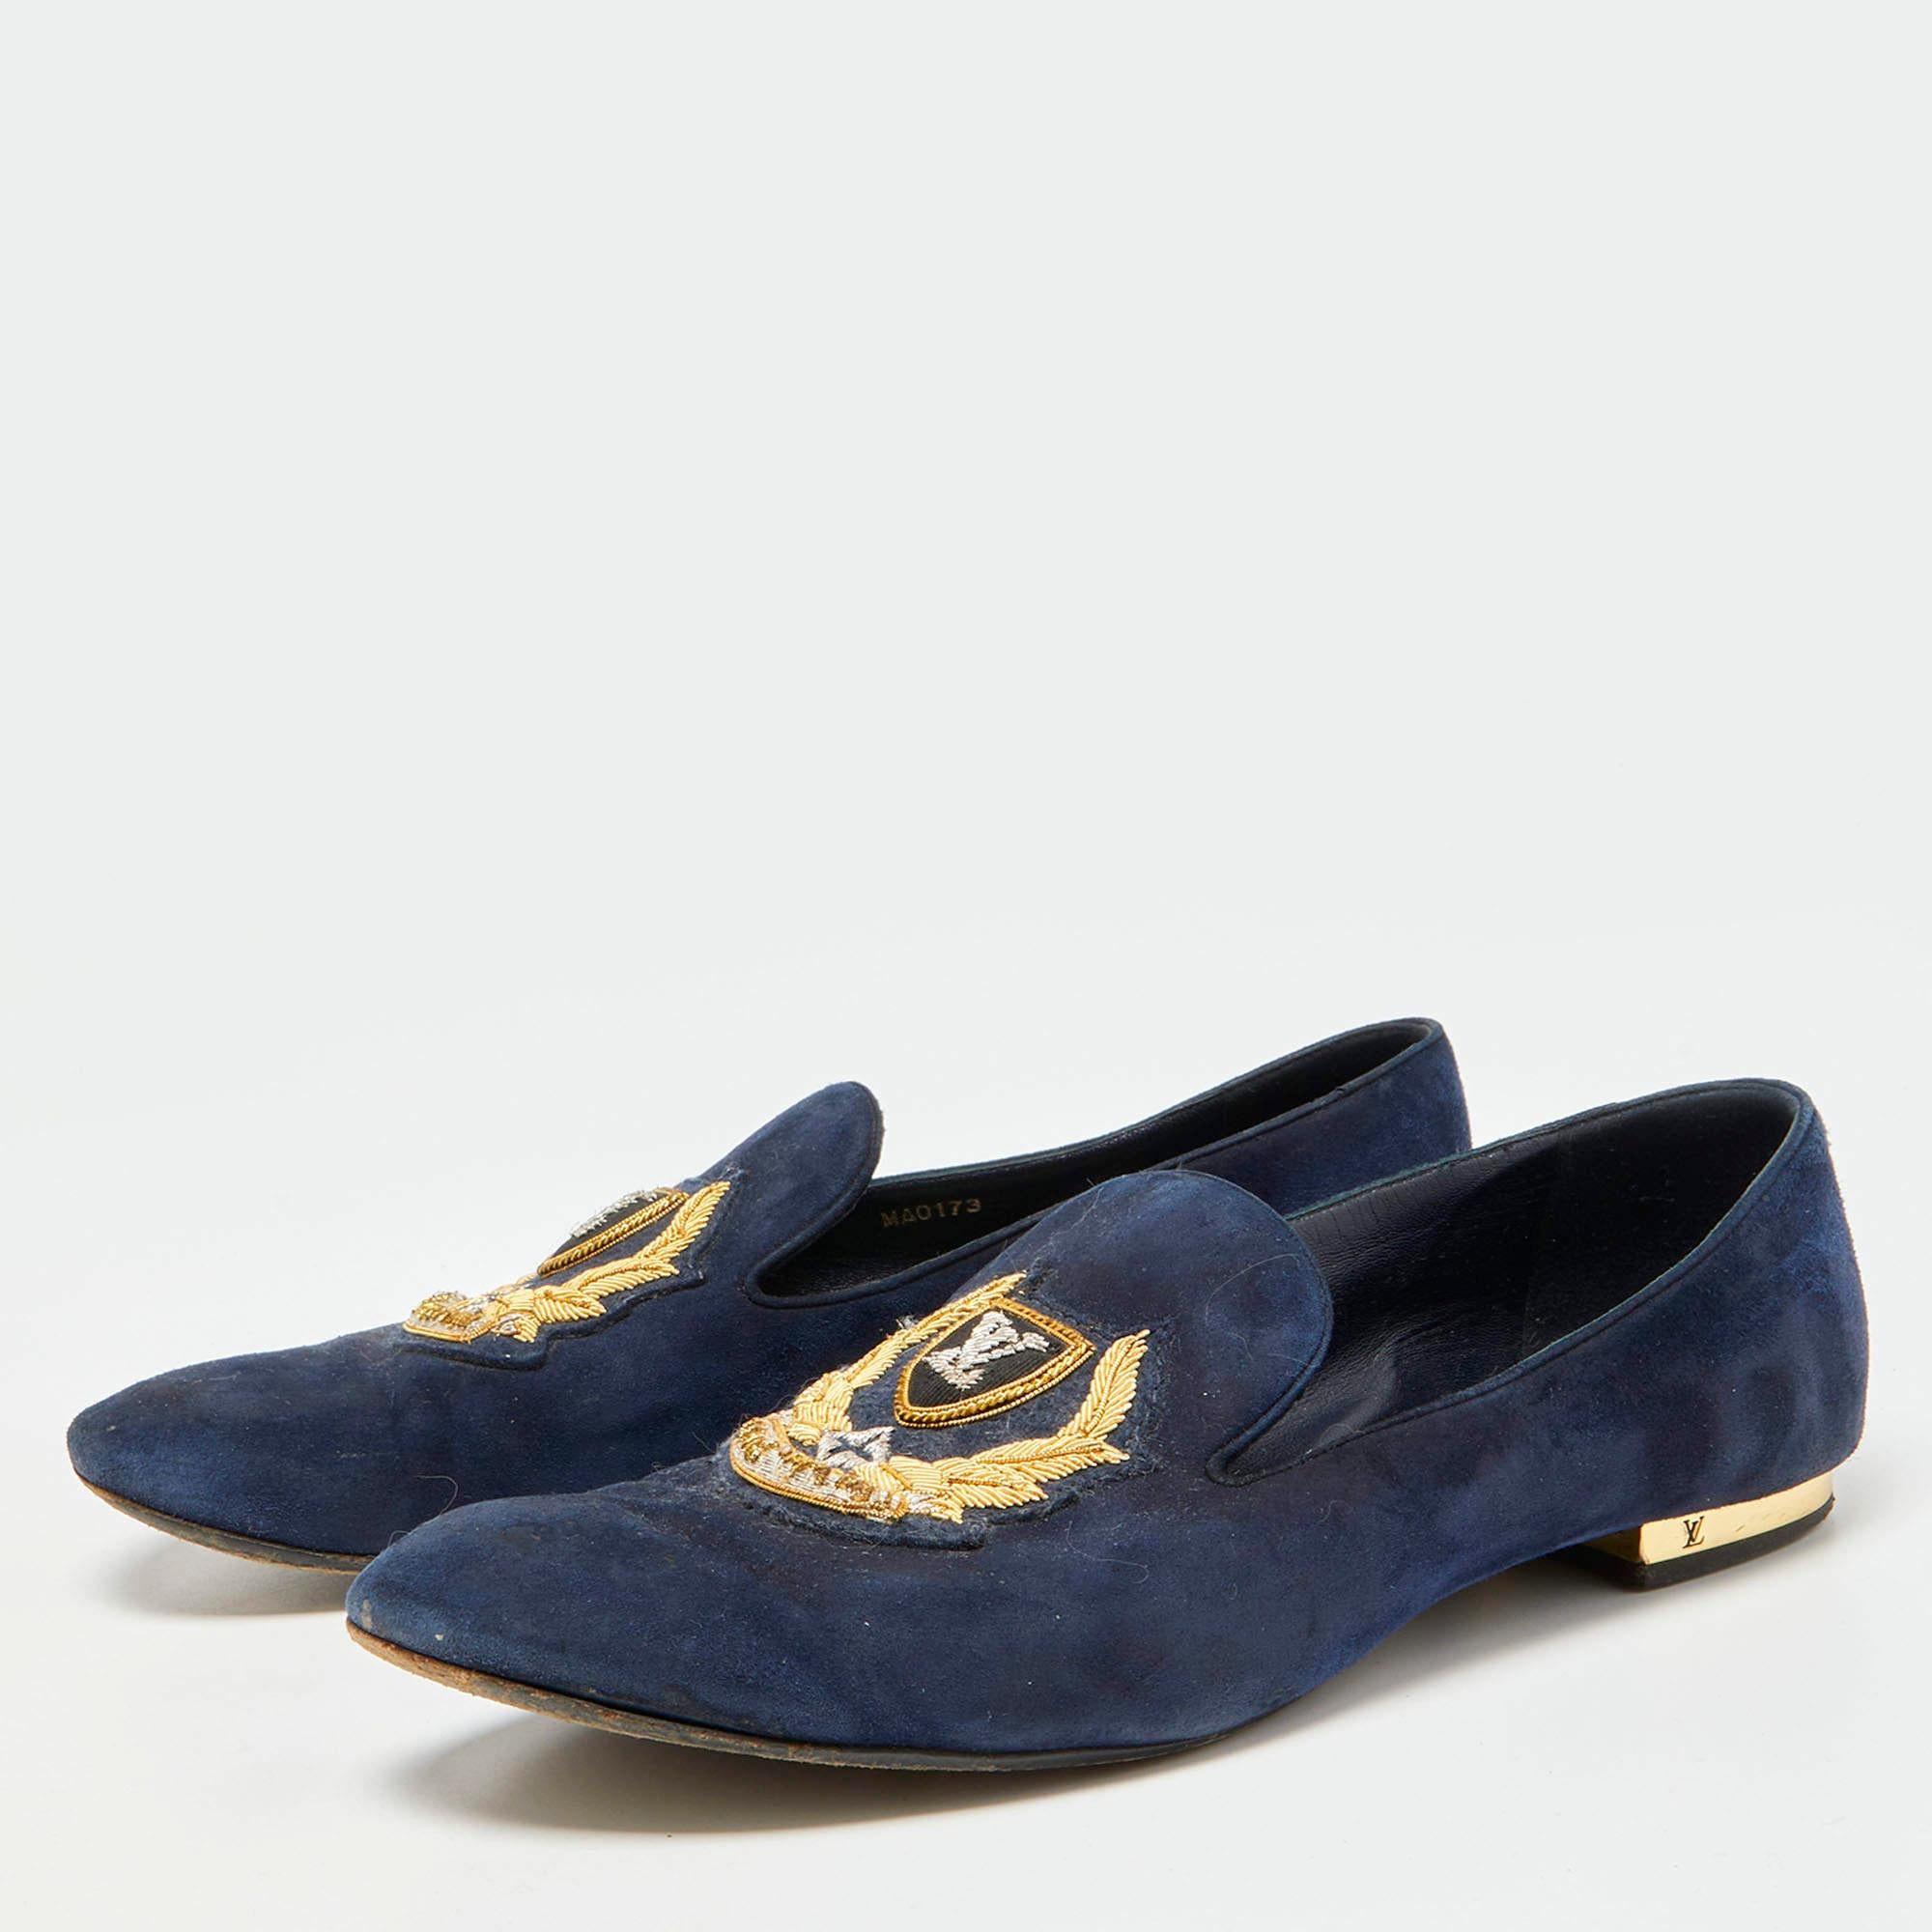 Black Louis Vuitton Navy Blue Suede Embroidered Smoking Slippers Size 38 For Sale